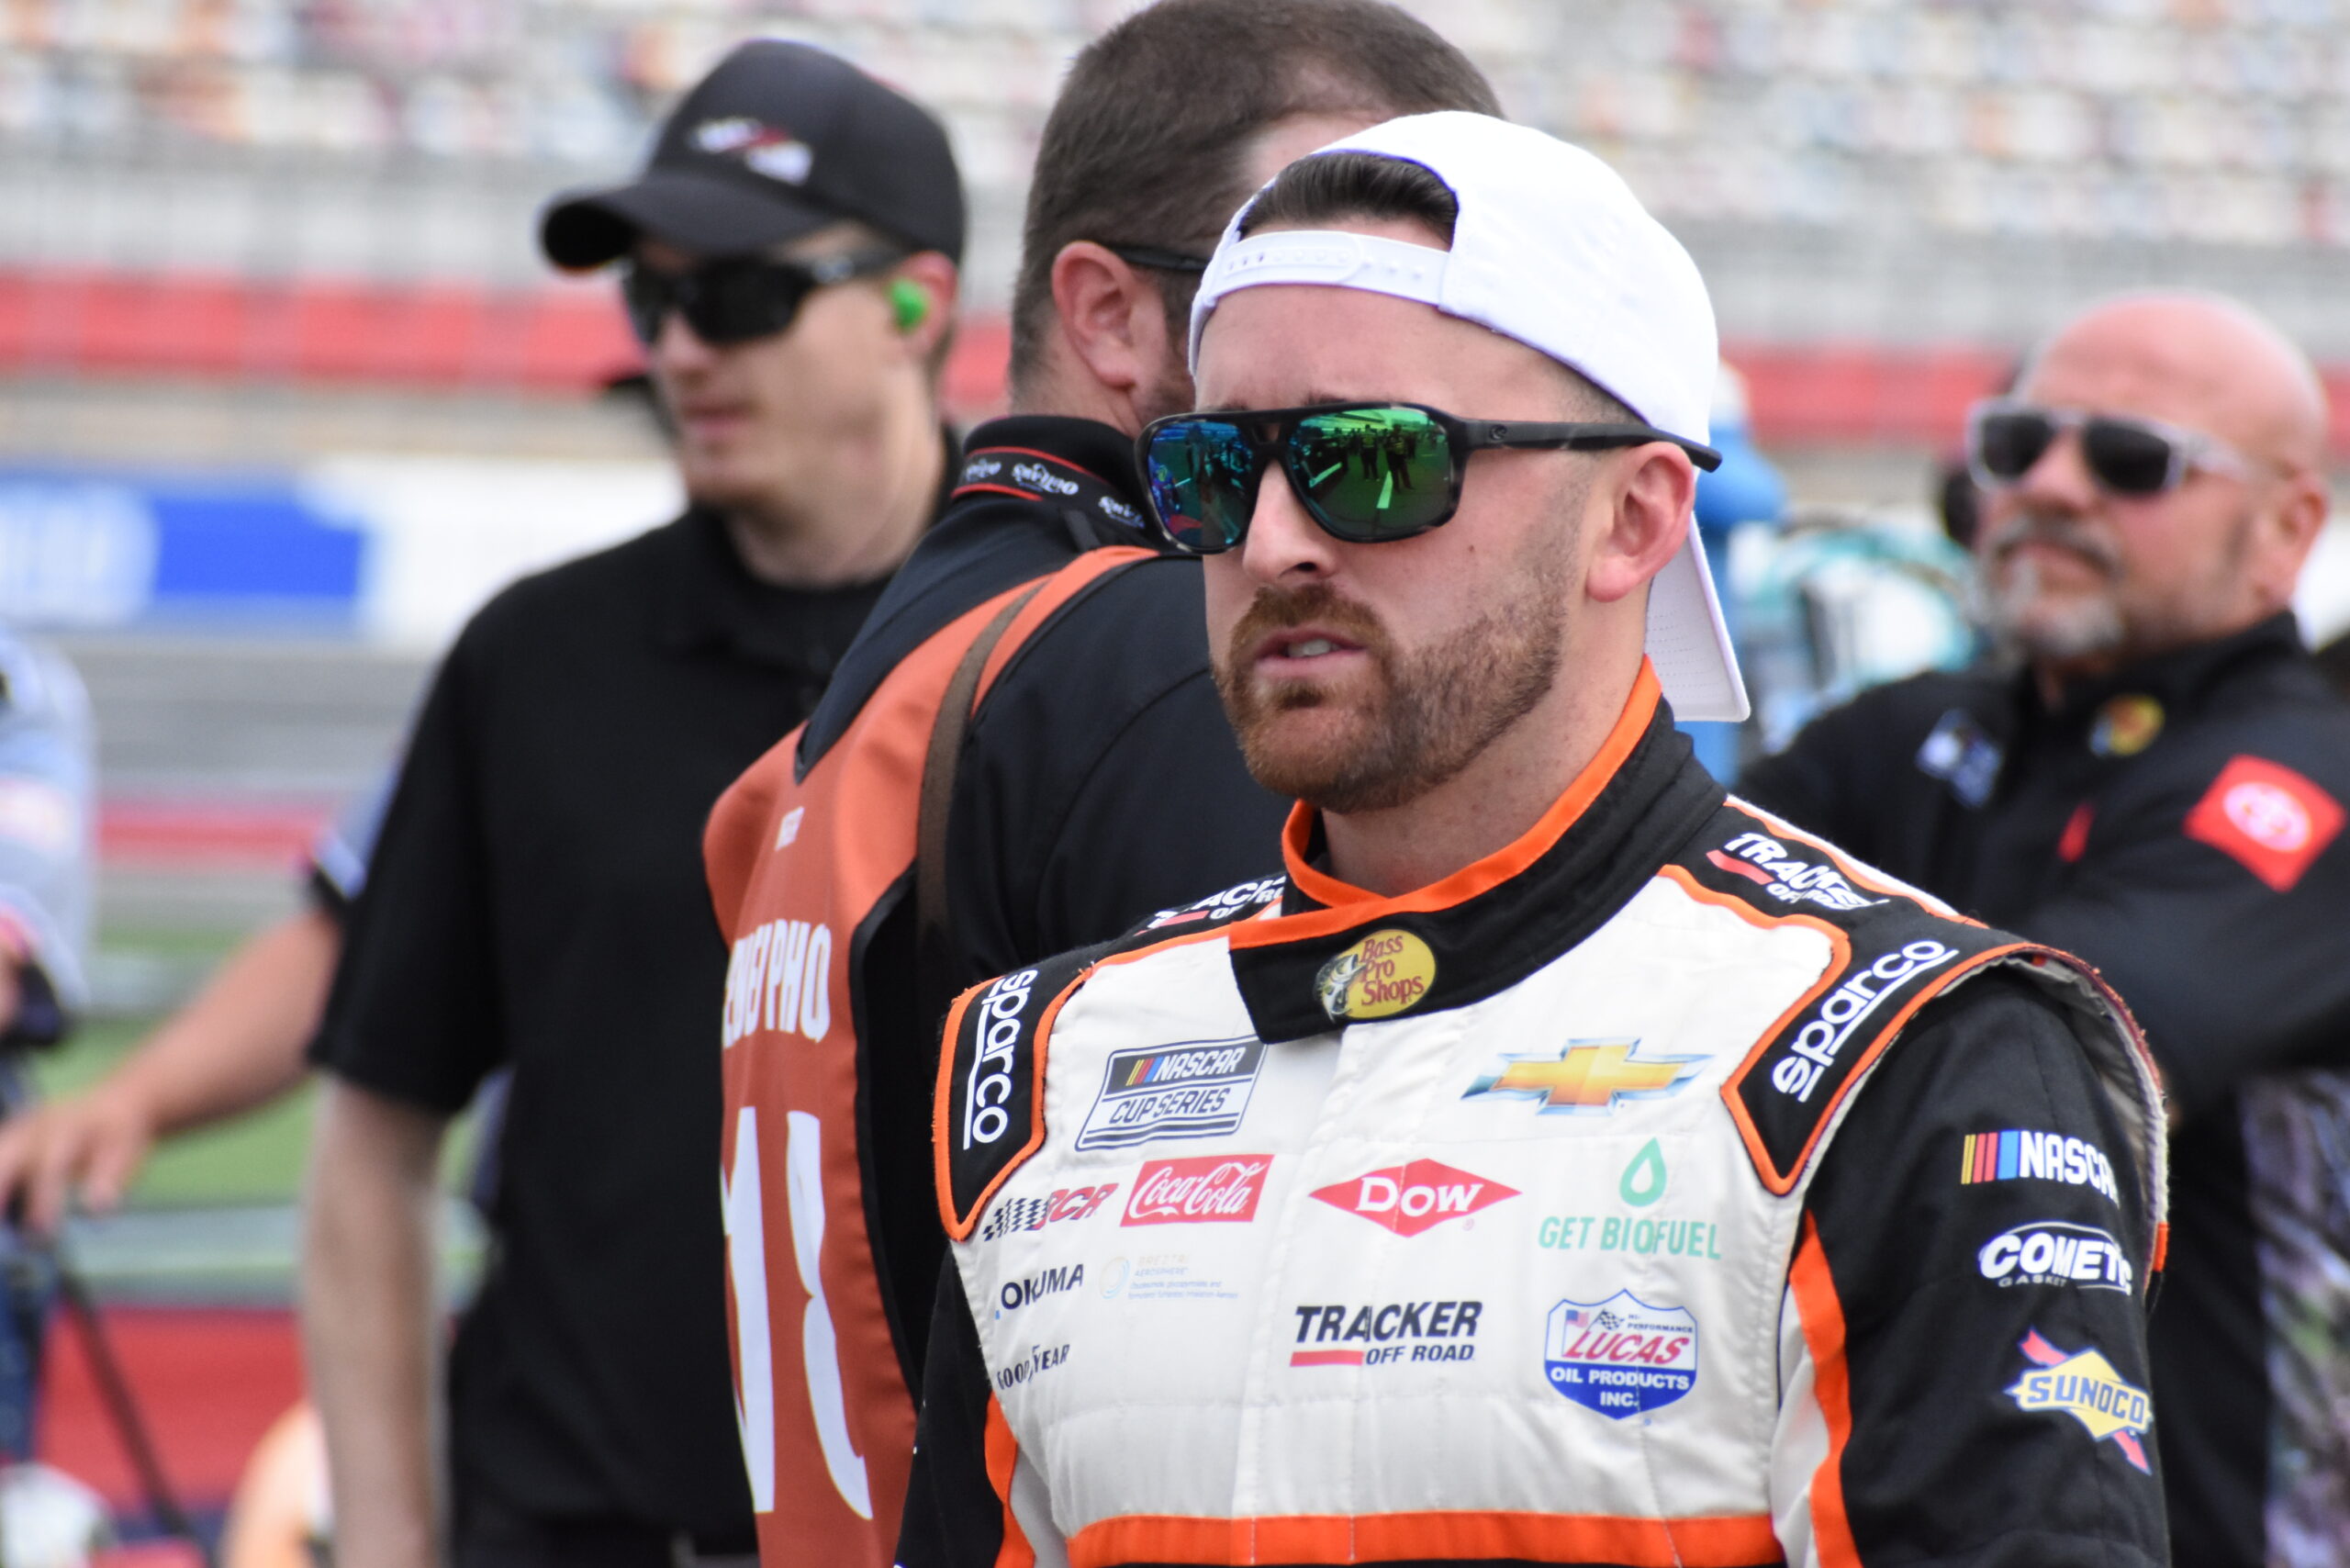 Ultimately, Austin Dillon's playlist might prove better than most top 40 radio stations. (Photo: Michael Guariglia/The Podium Finish)